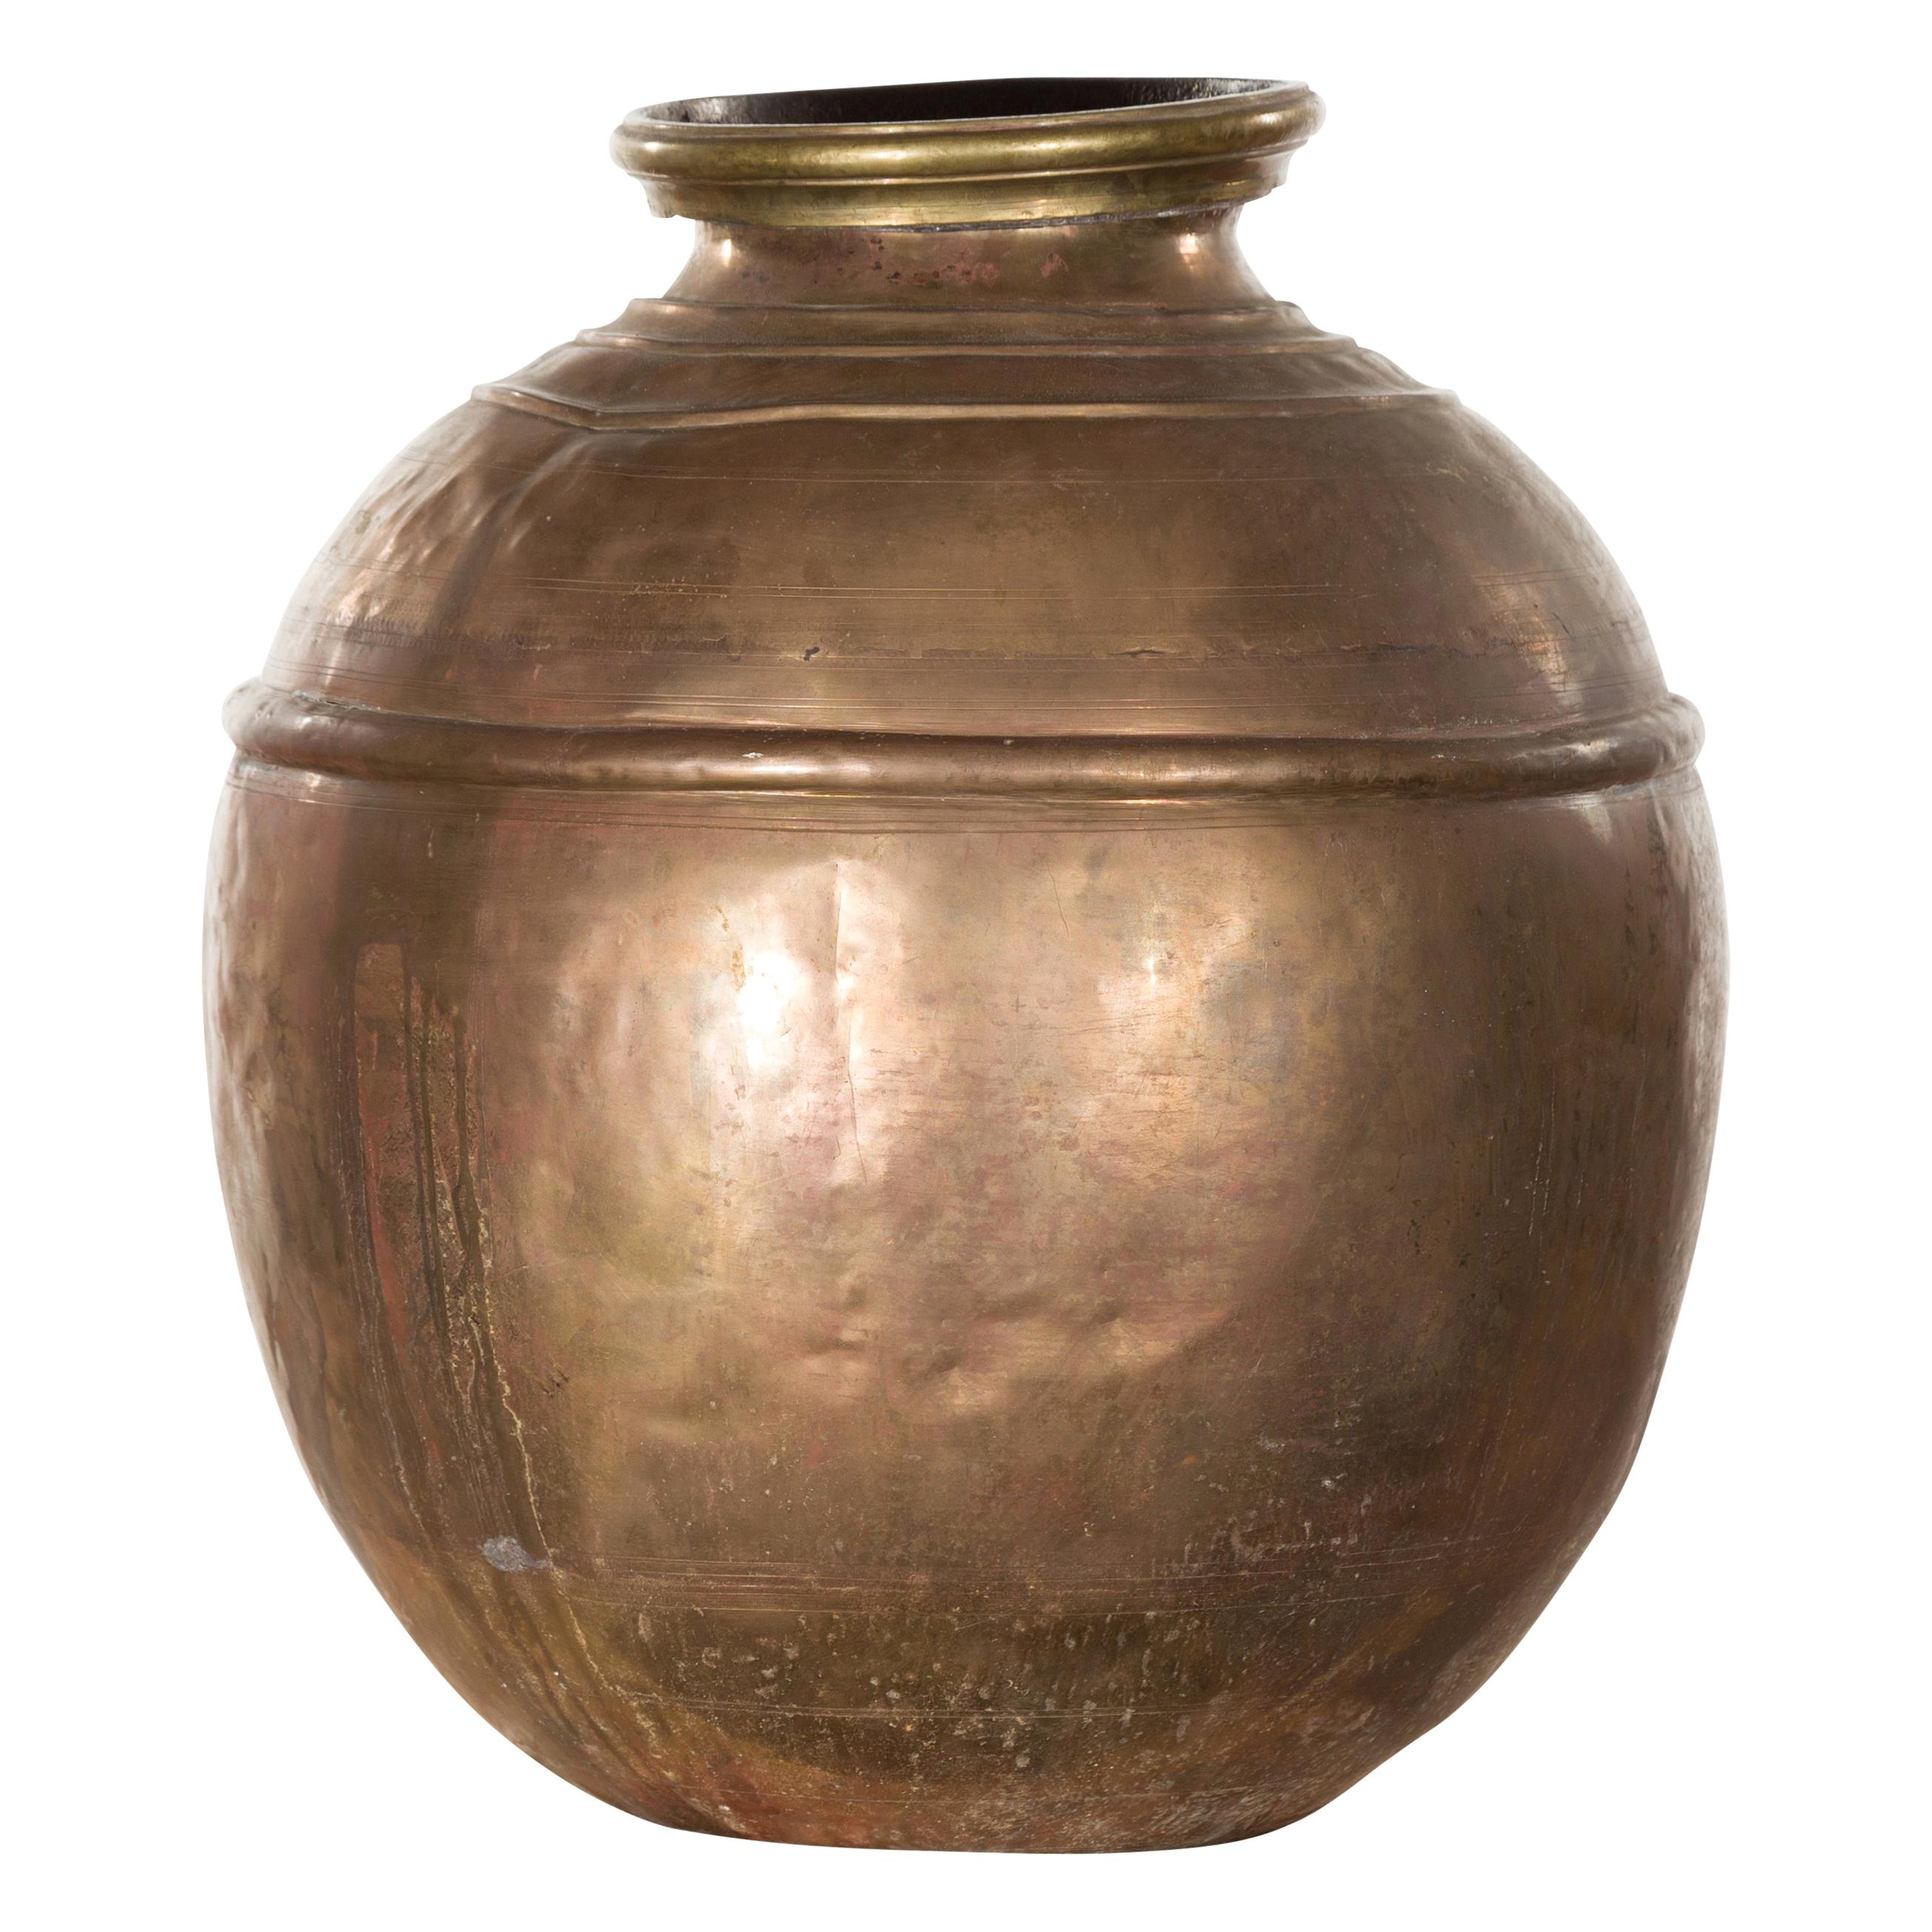 Indian Vintage Brass Water Jar with Concentric Rings and Distressed Appearance